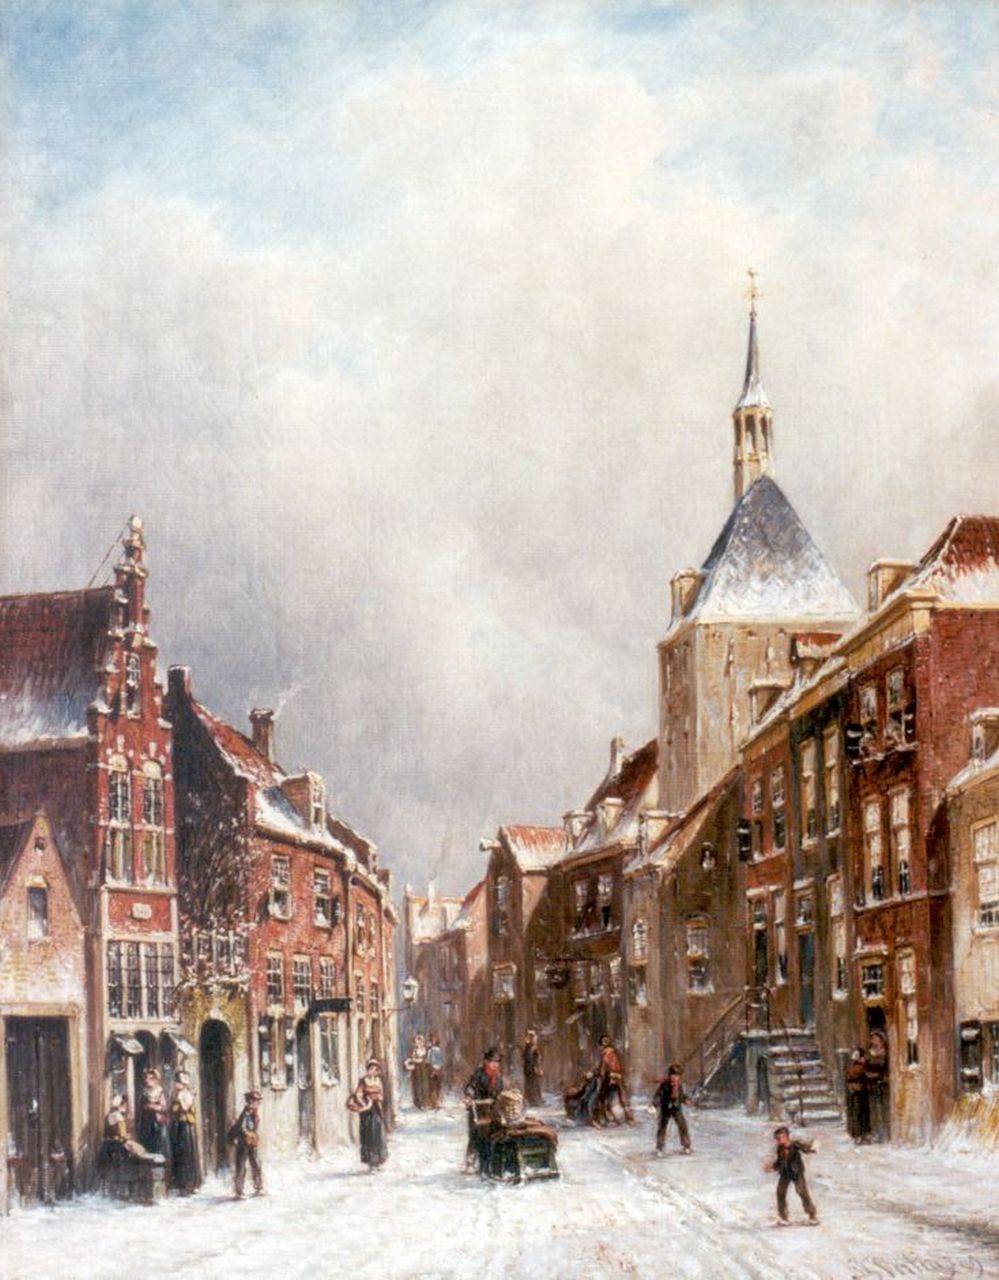 Vertin P.G.  | Petrus Gerardus Vertin, A town in winter, oil on canvas 45.0 x 34.9 cm, signed l.r. and dated '89